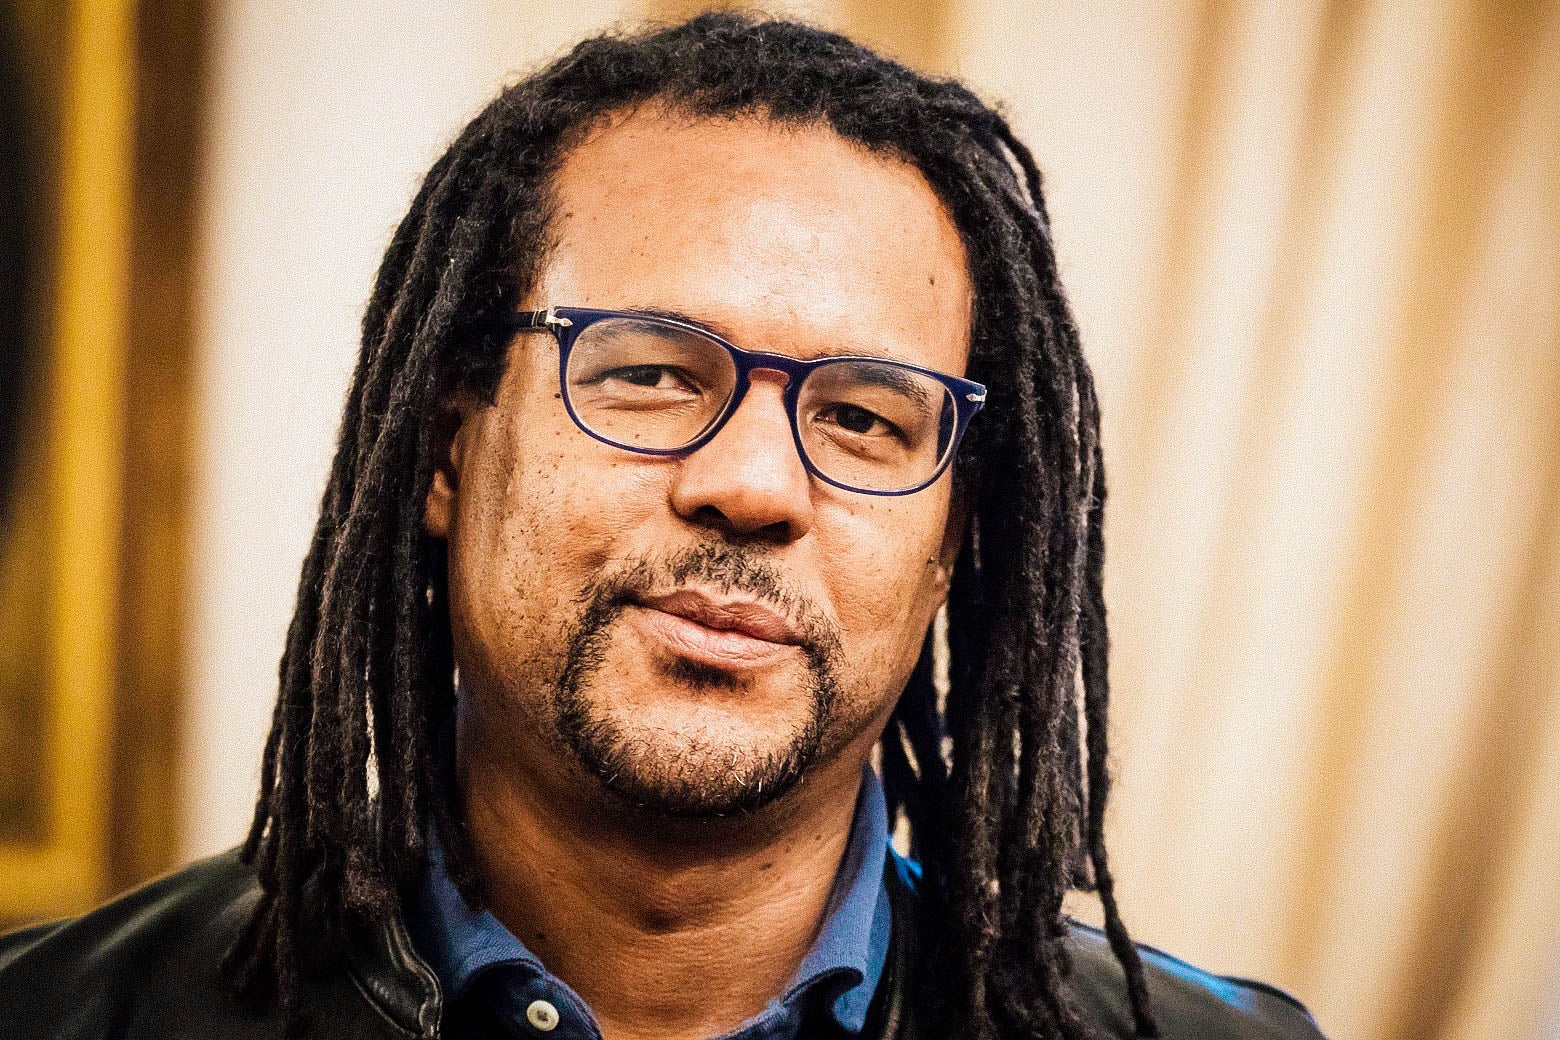 A Black man with dreadlocks and glasses.